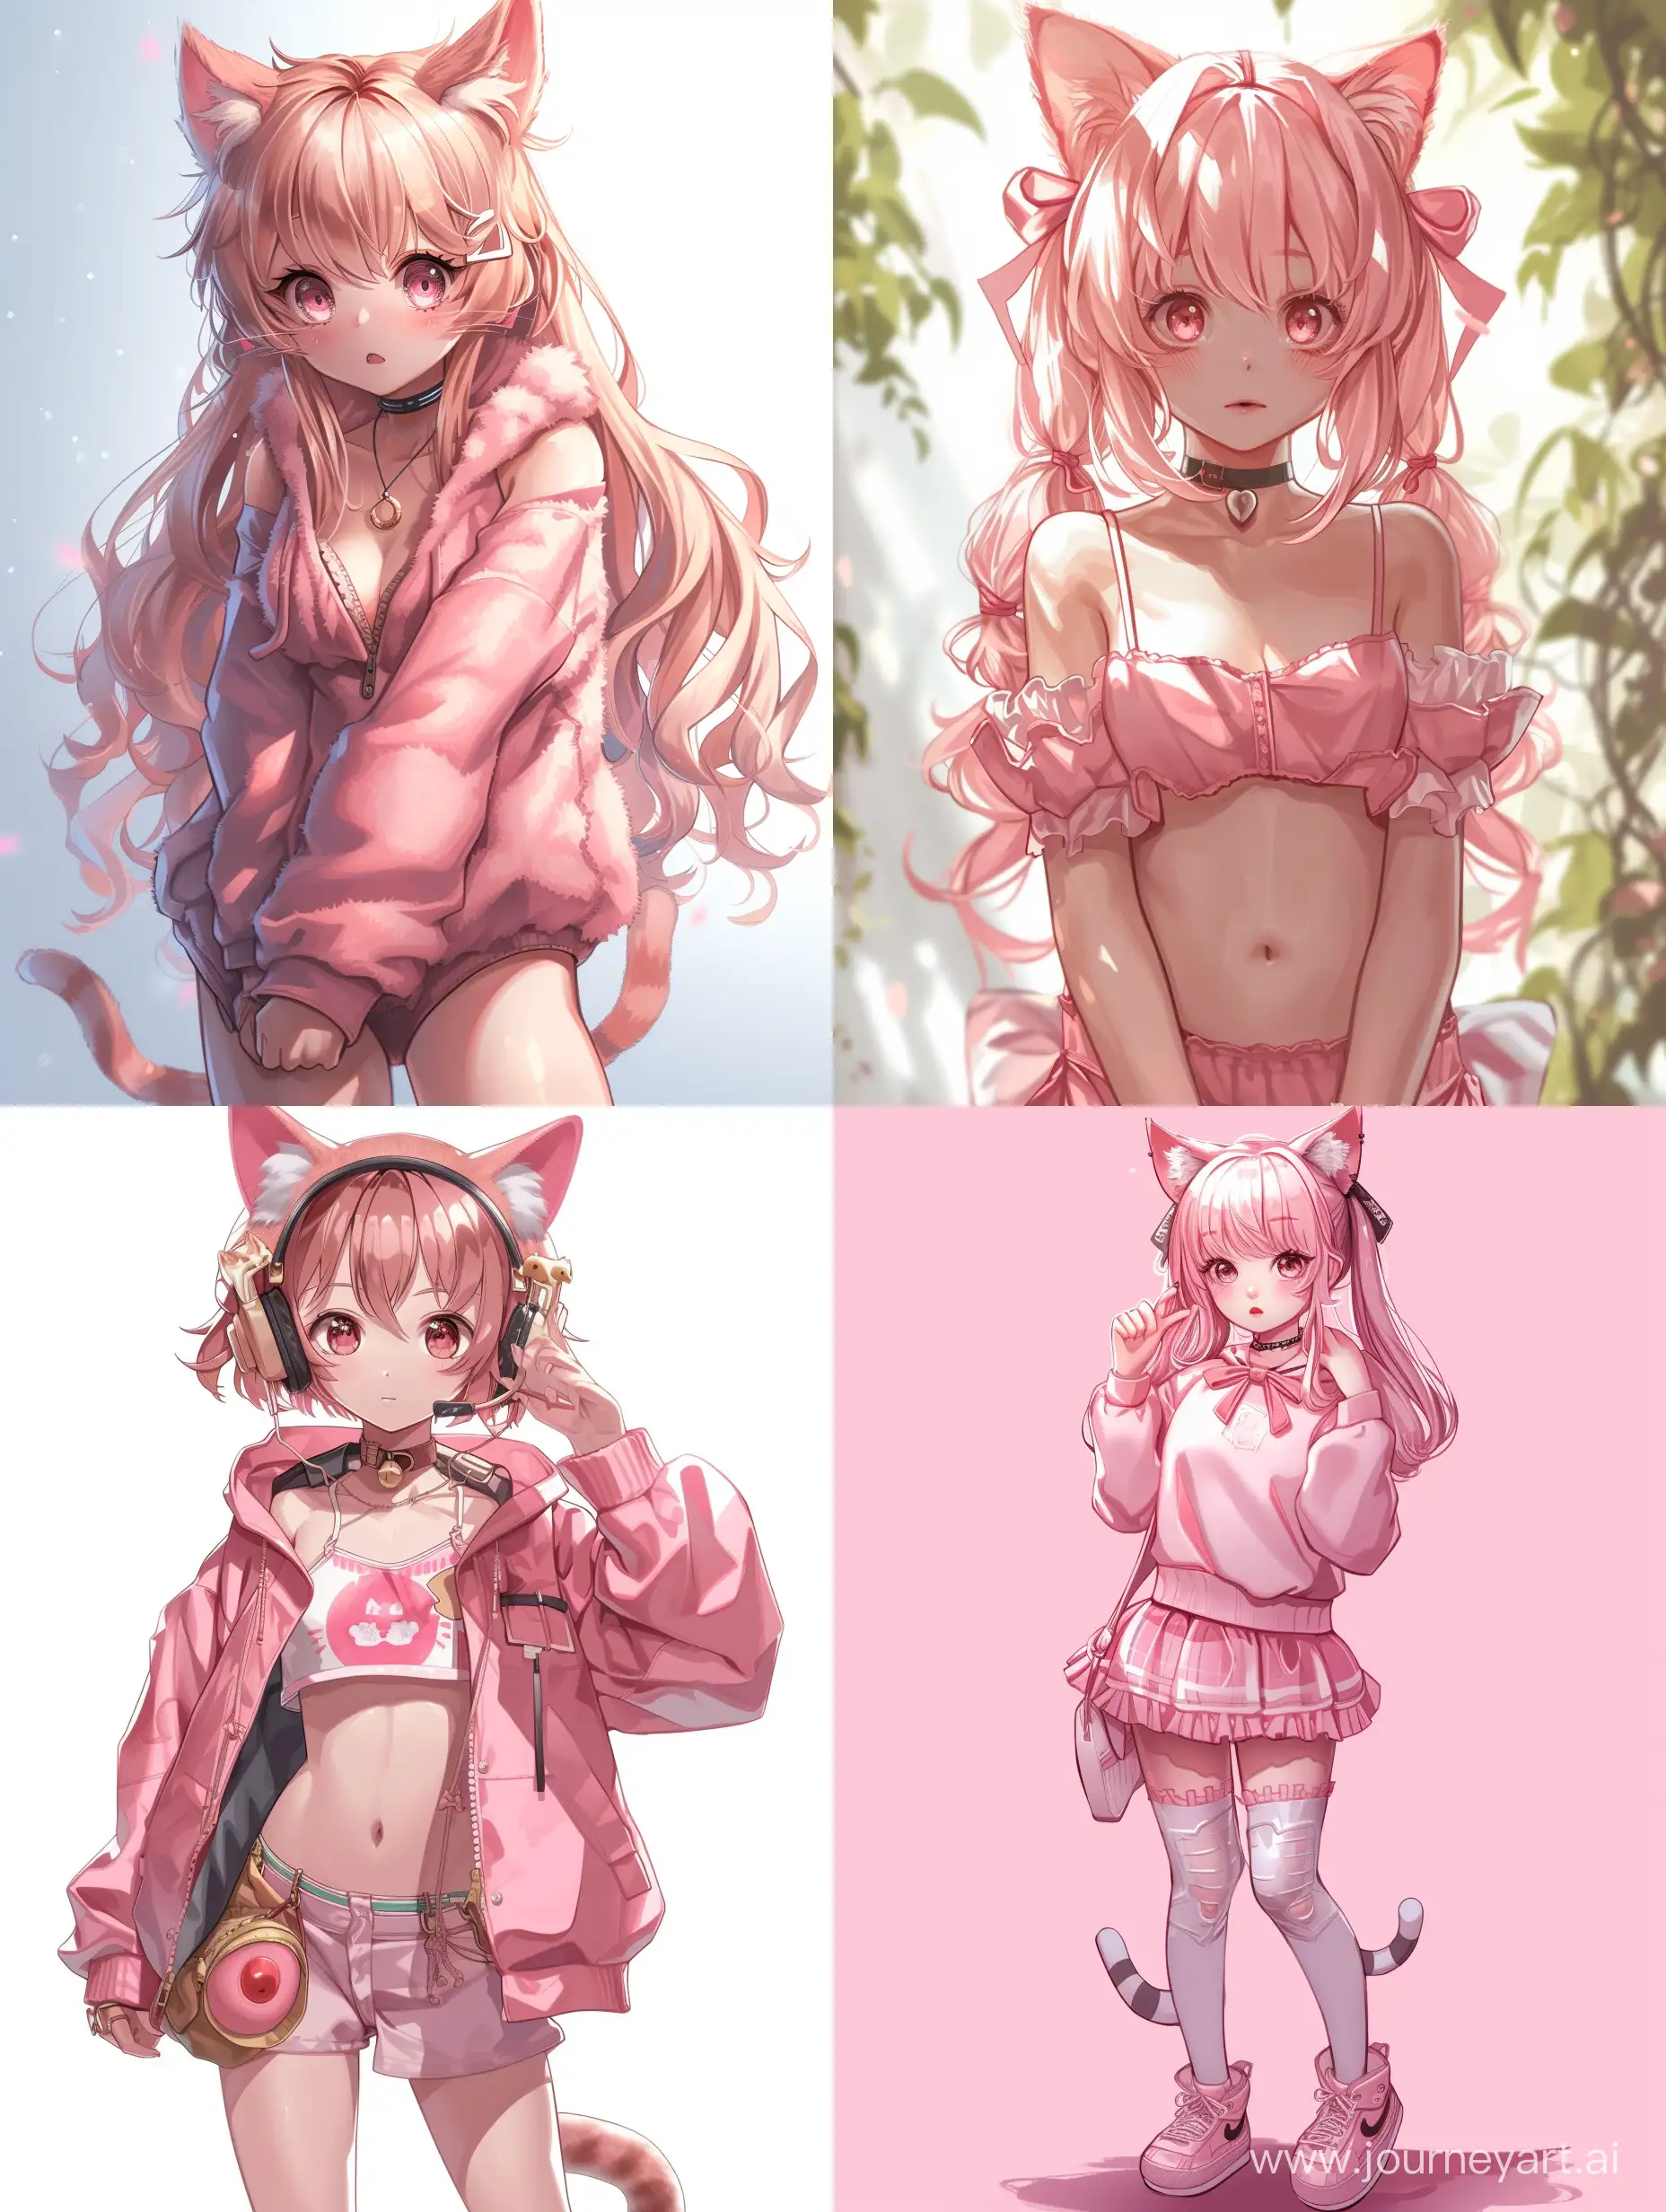 Adorable-Anime-Girl-with-Cat-Ears-in-Vibrant-Pink-Fullbody-Design